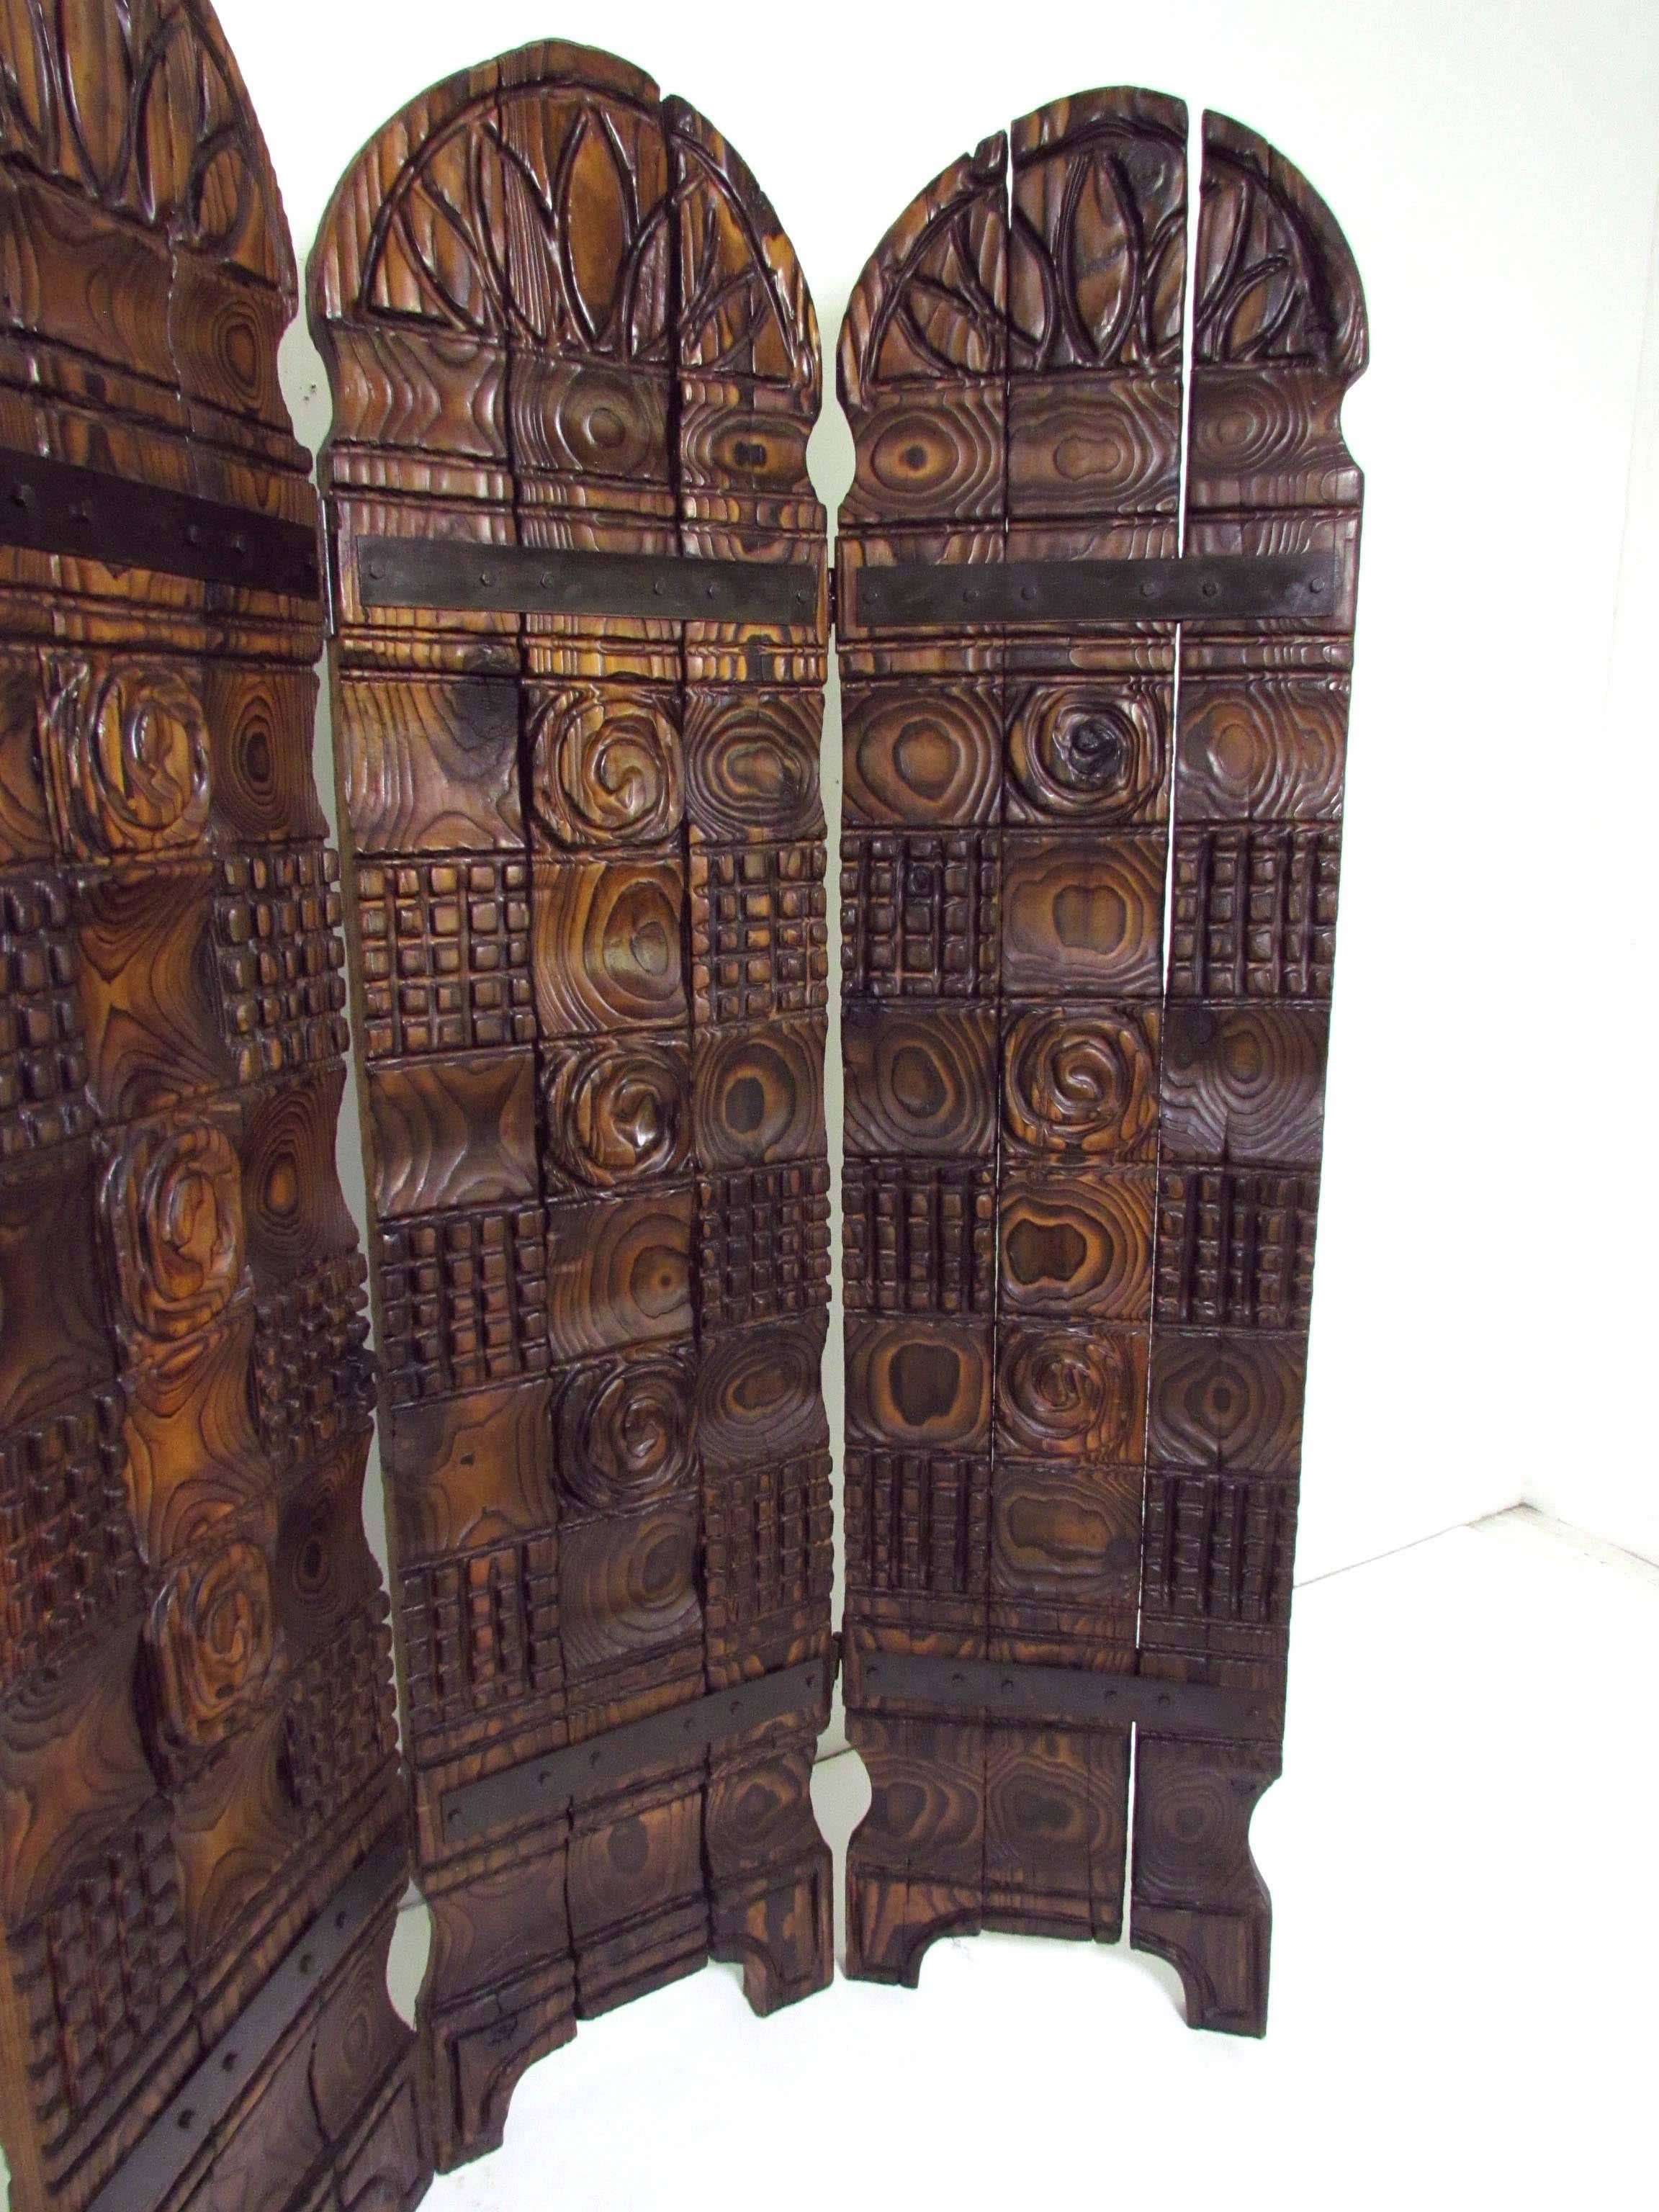 Rare decorative three-panel screen in the hand-carved wood tiki or Polynesian style for which Witco is known. 

Finished on the back but not with the same carvings.

Each panel measures 17.5